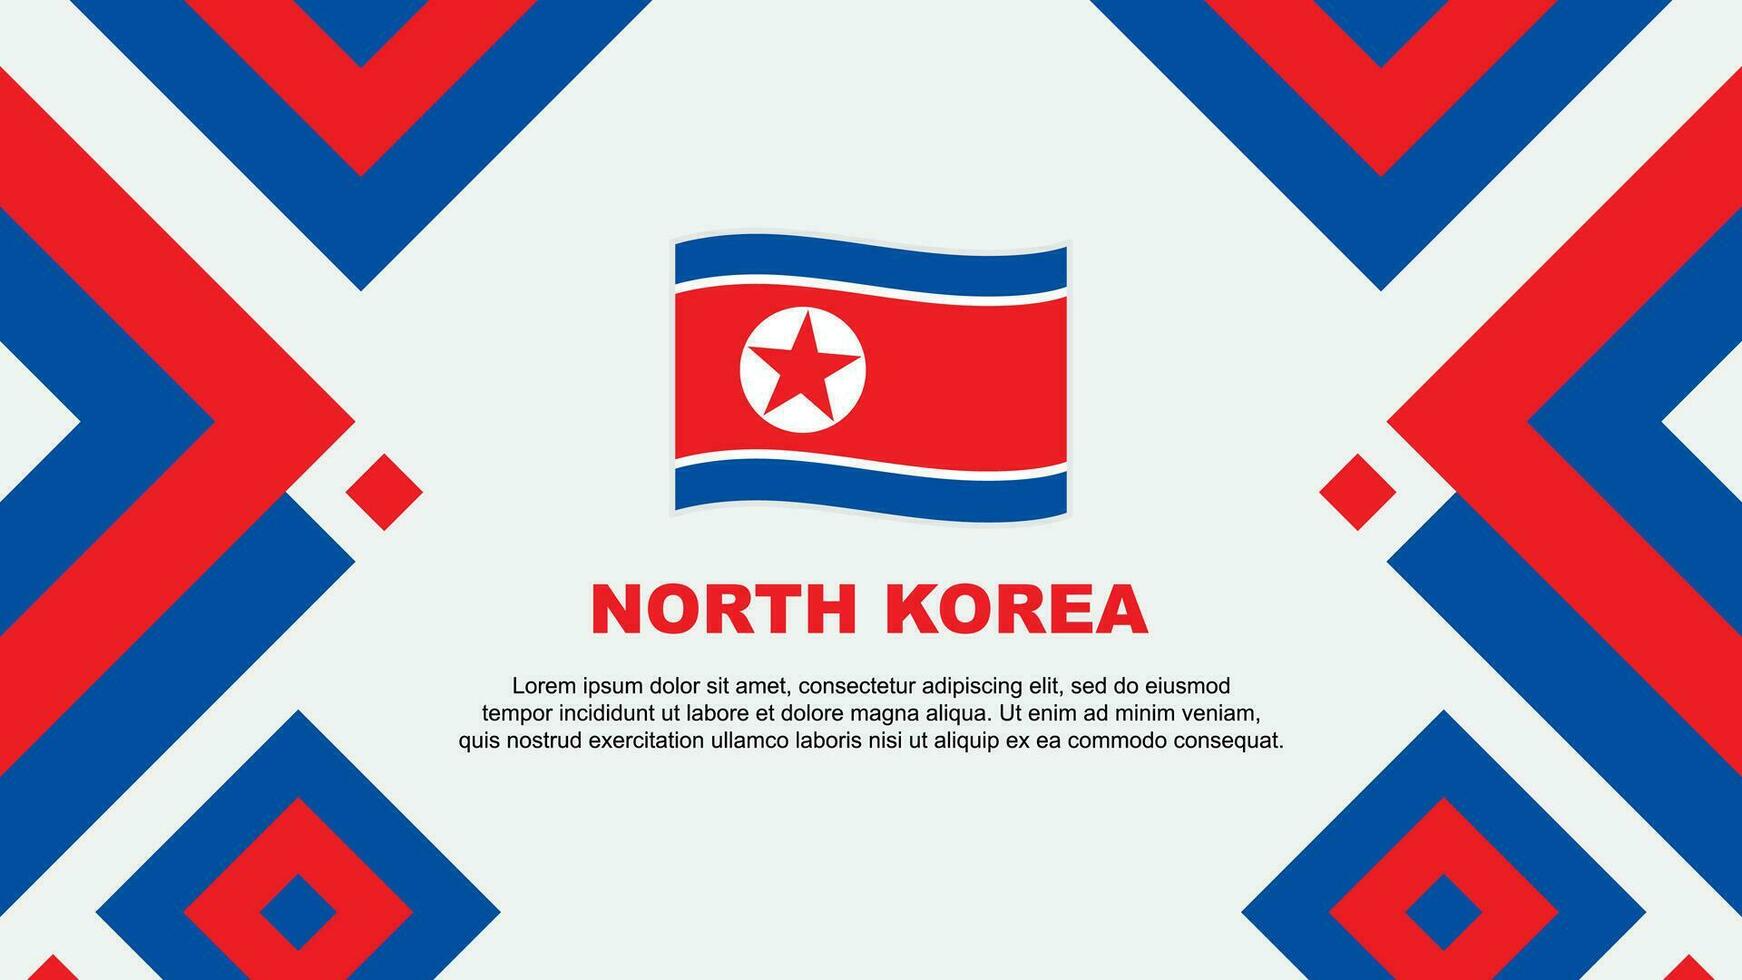 North Korea Flag Abstract Background Design Template. North Korea Independence Day Banner Wallpaper Vector Illustration. North Korea Template